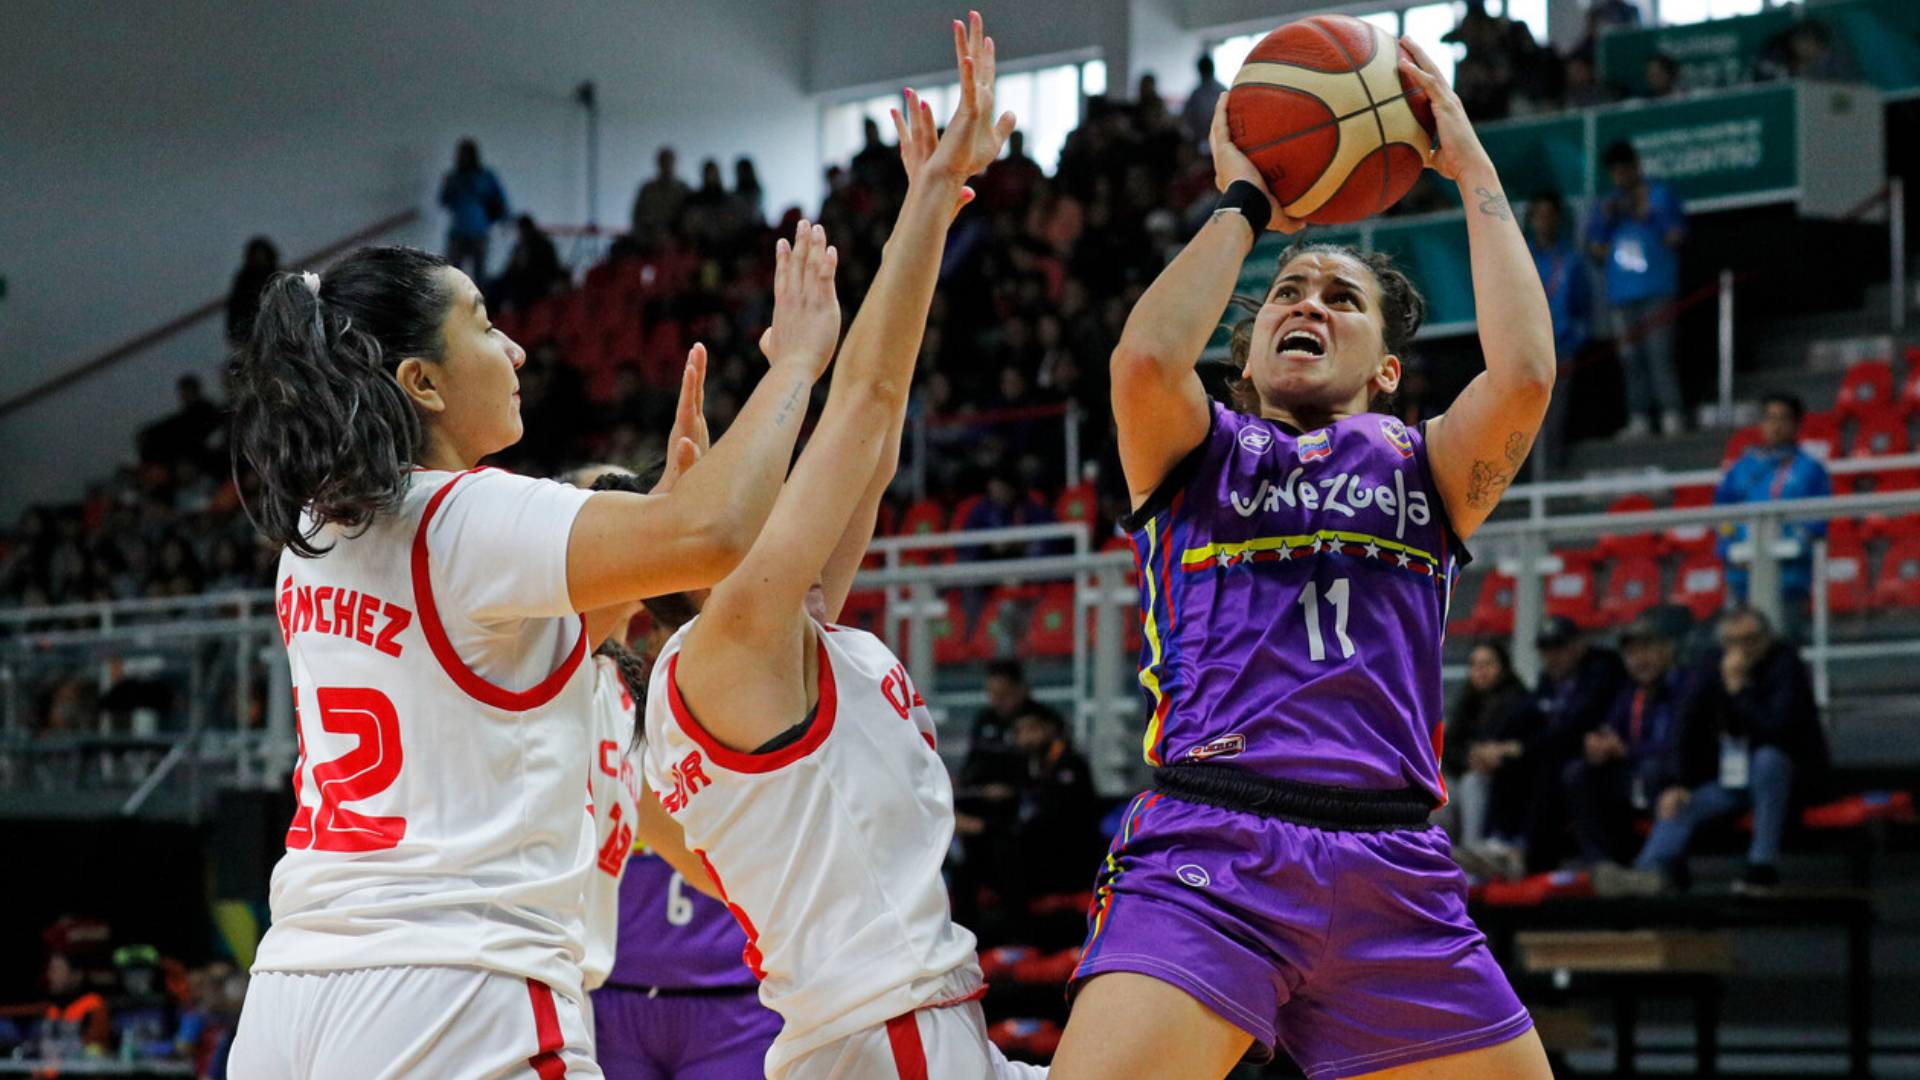 Female’s Basketball: Venezuela defeated Chile and finished in fifth place